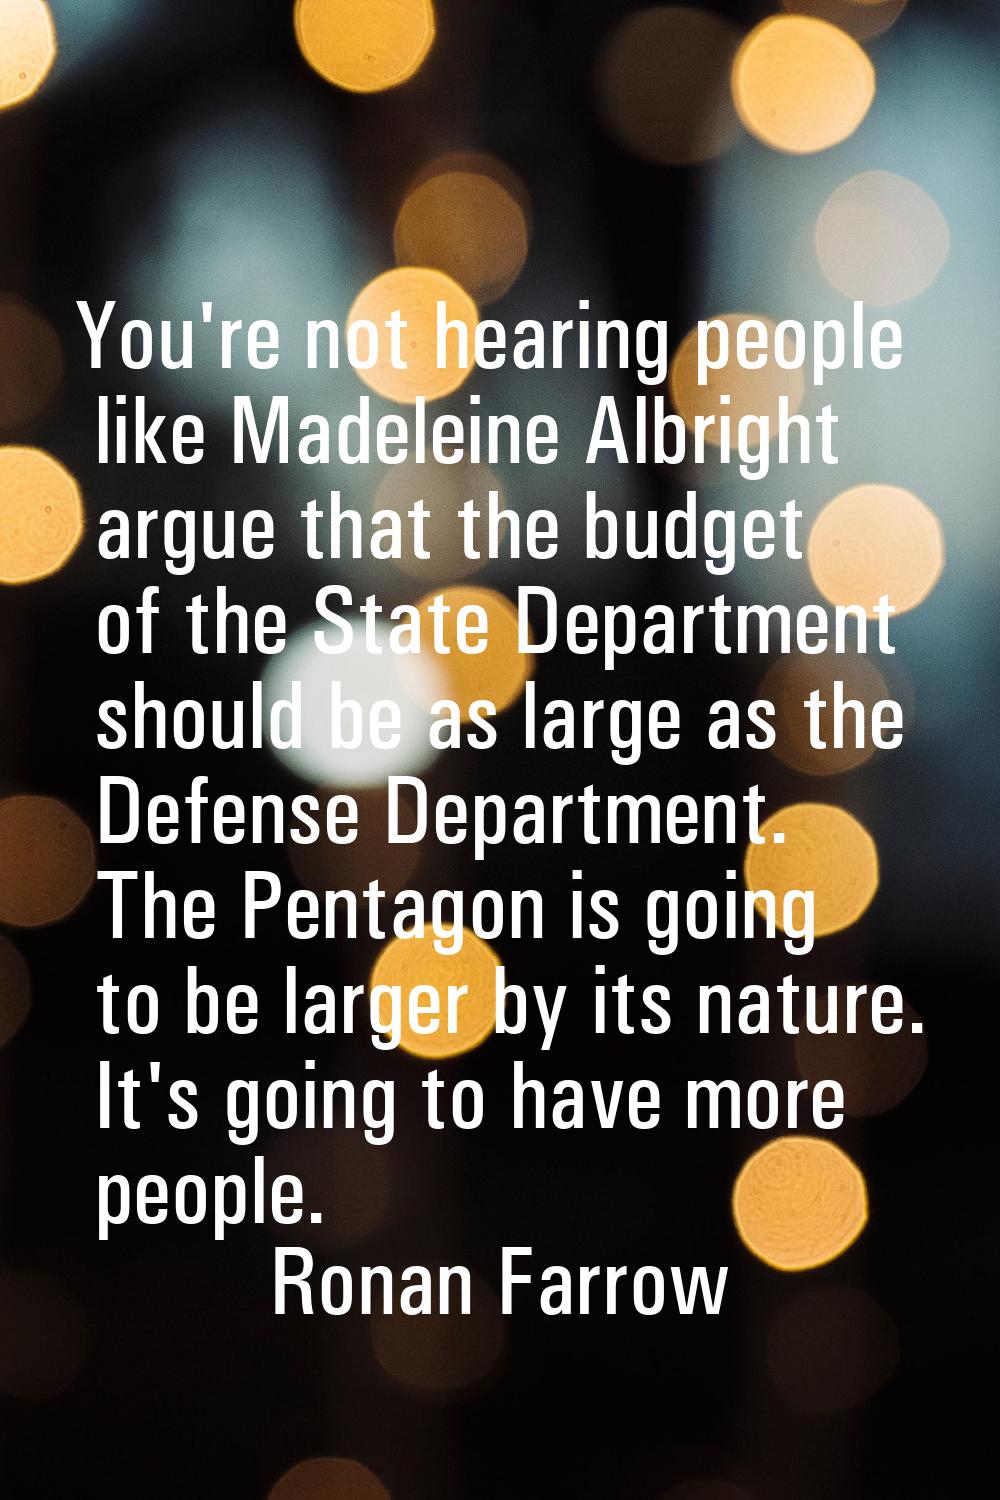 You're not hearing people like Madeleine Albright argue that the budget of the State Department sho